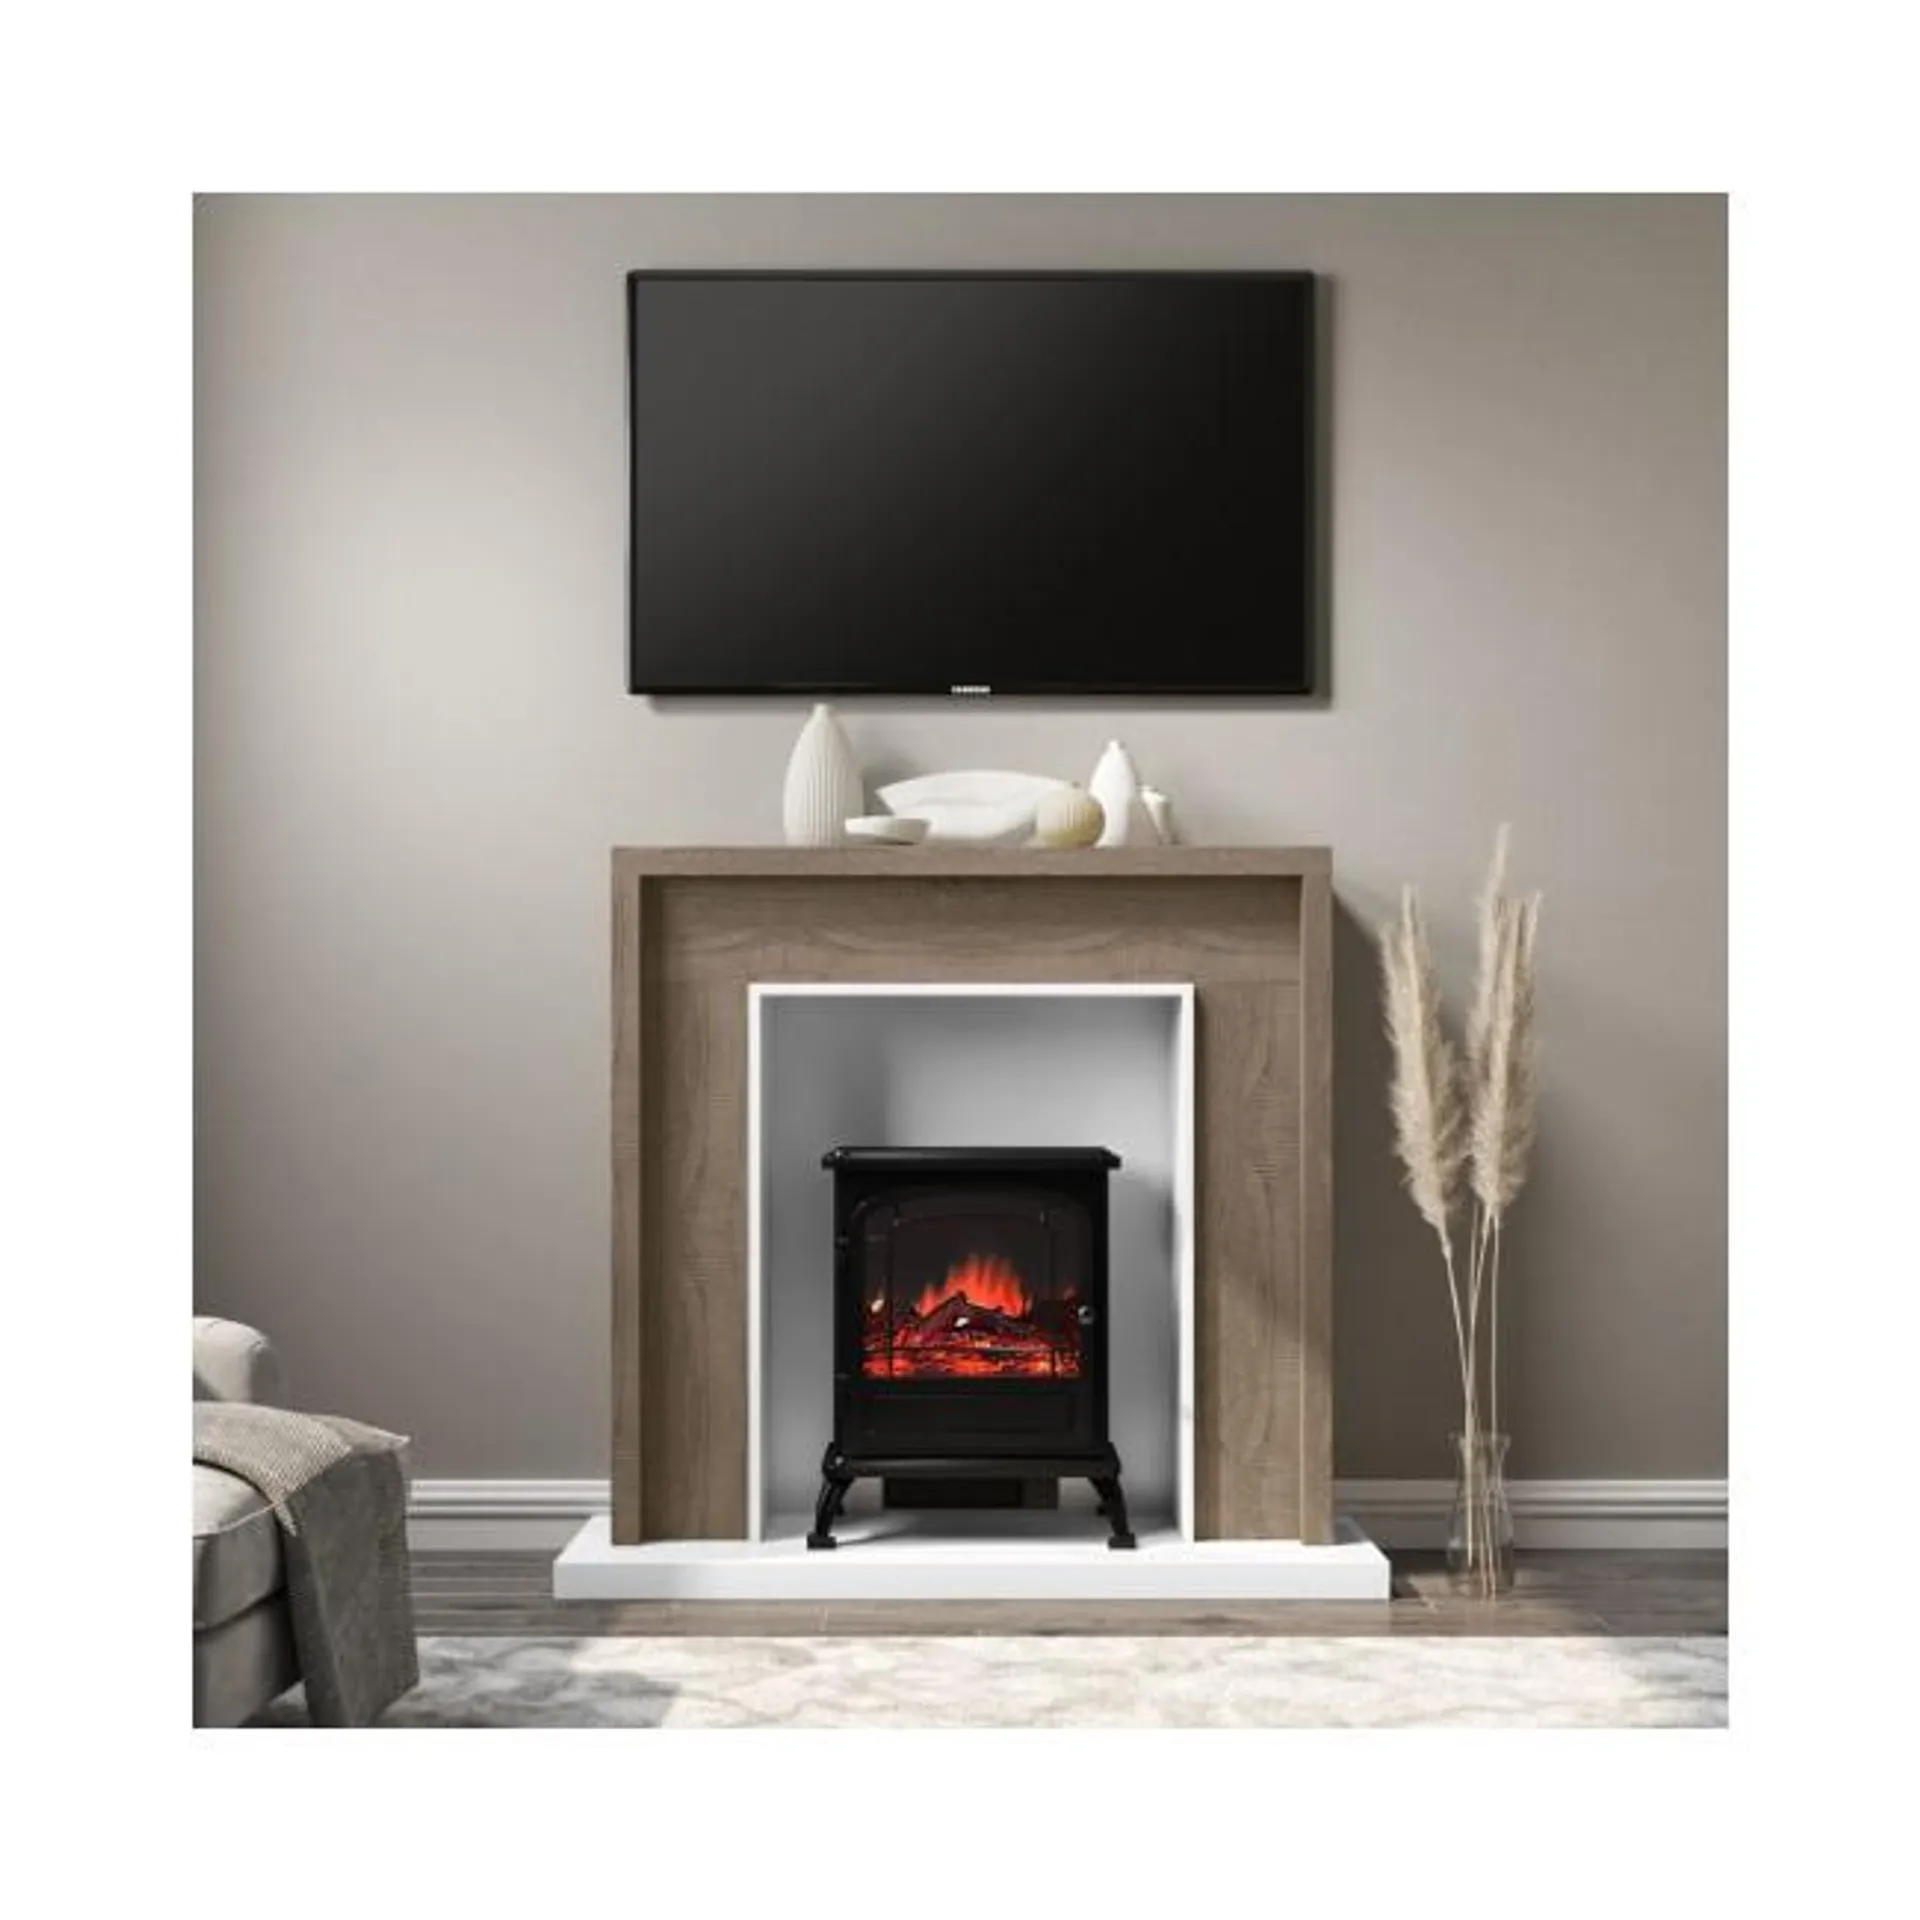 Oak Effect Freestanding Electric Fireplace Suite with Black Stove- AmberGlo